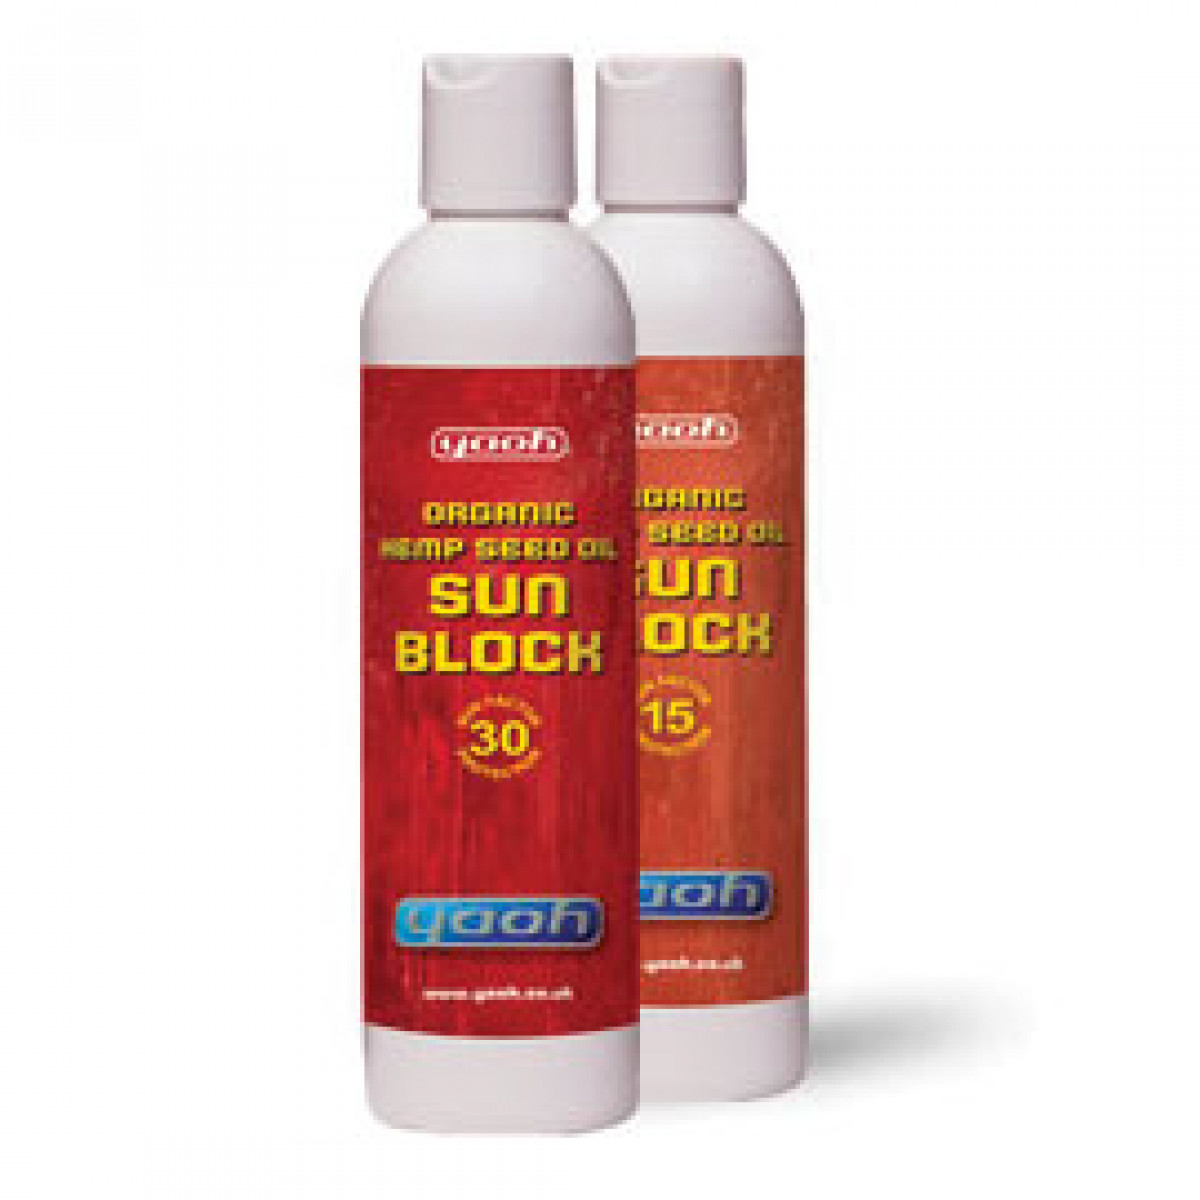 Product picture for Hemp Seed Oil Sun Lotion SPF 30